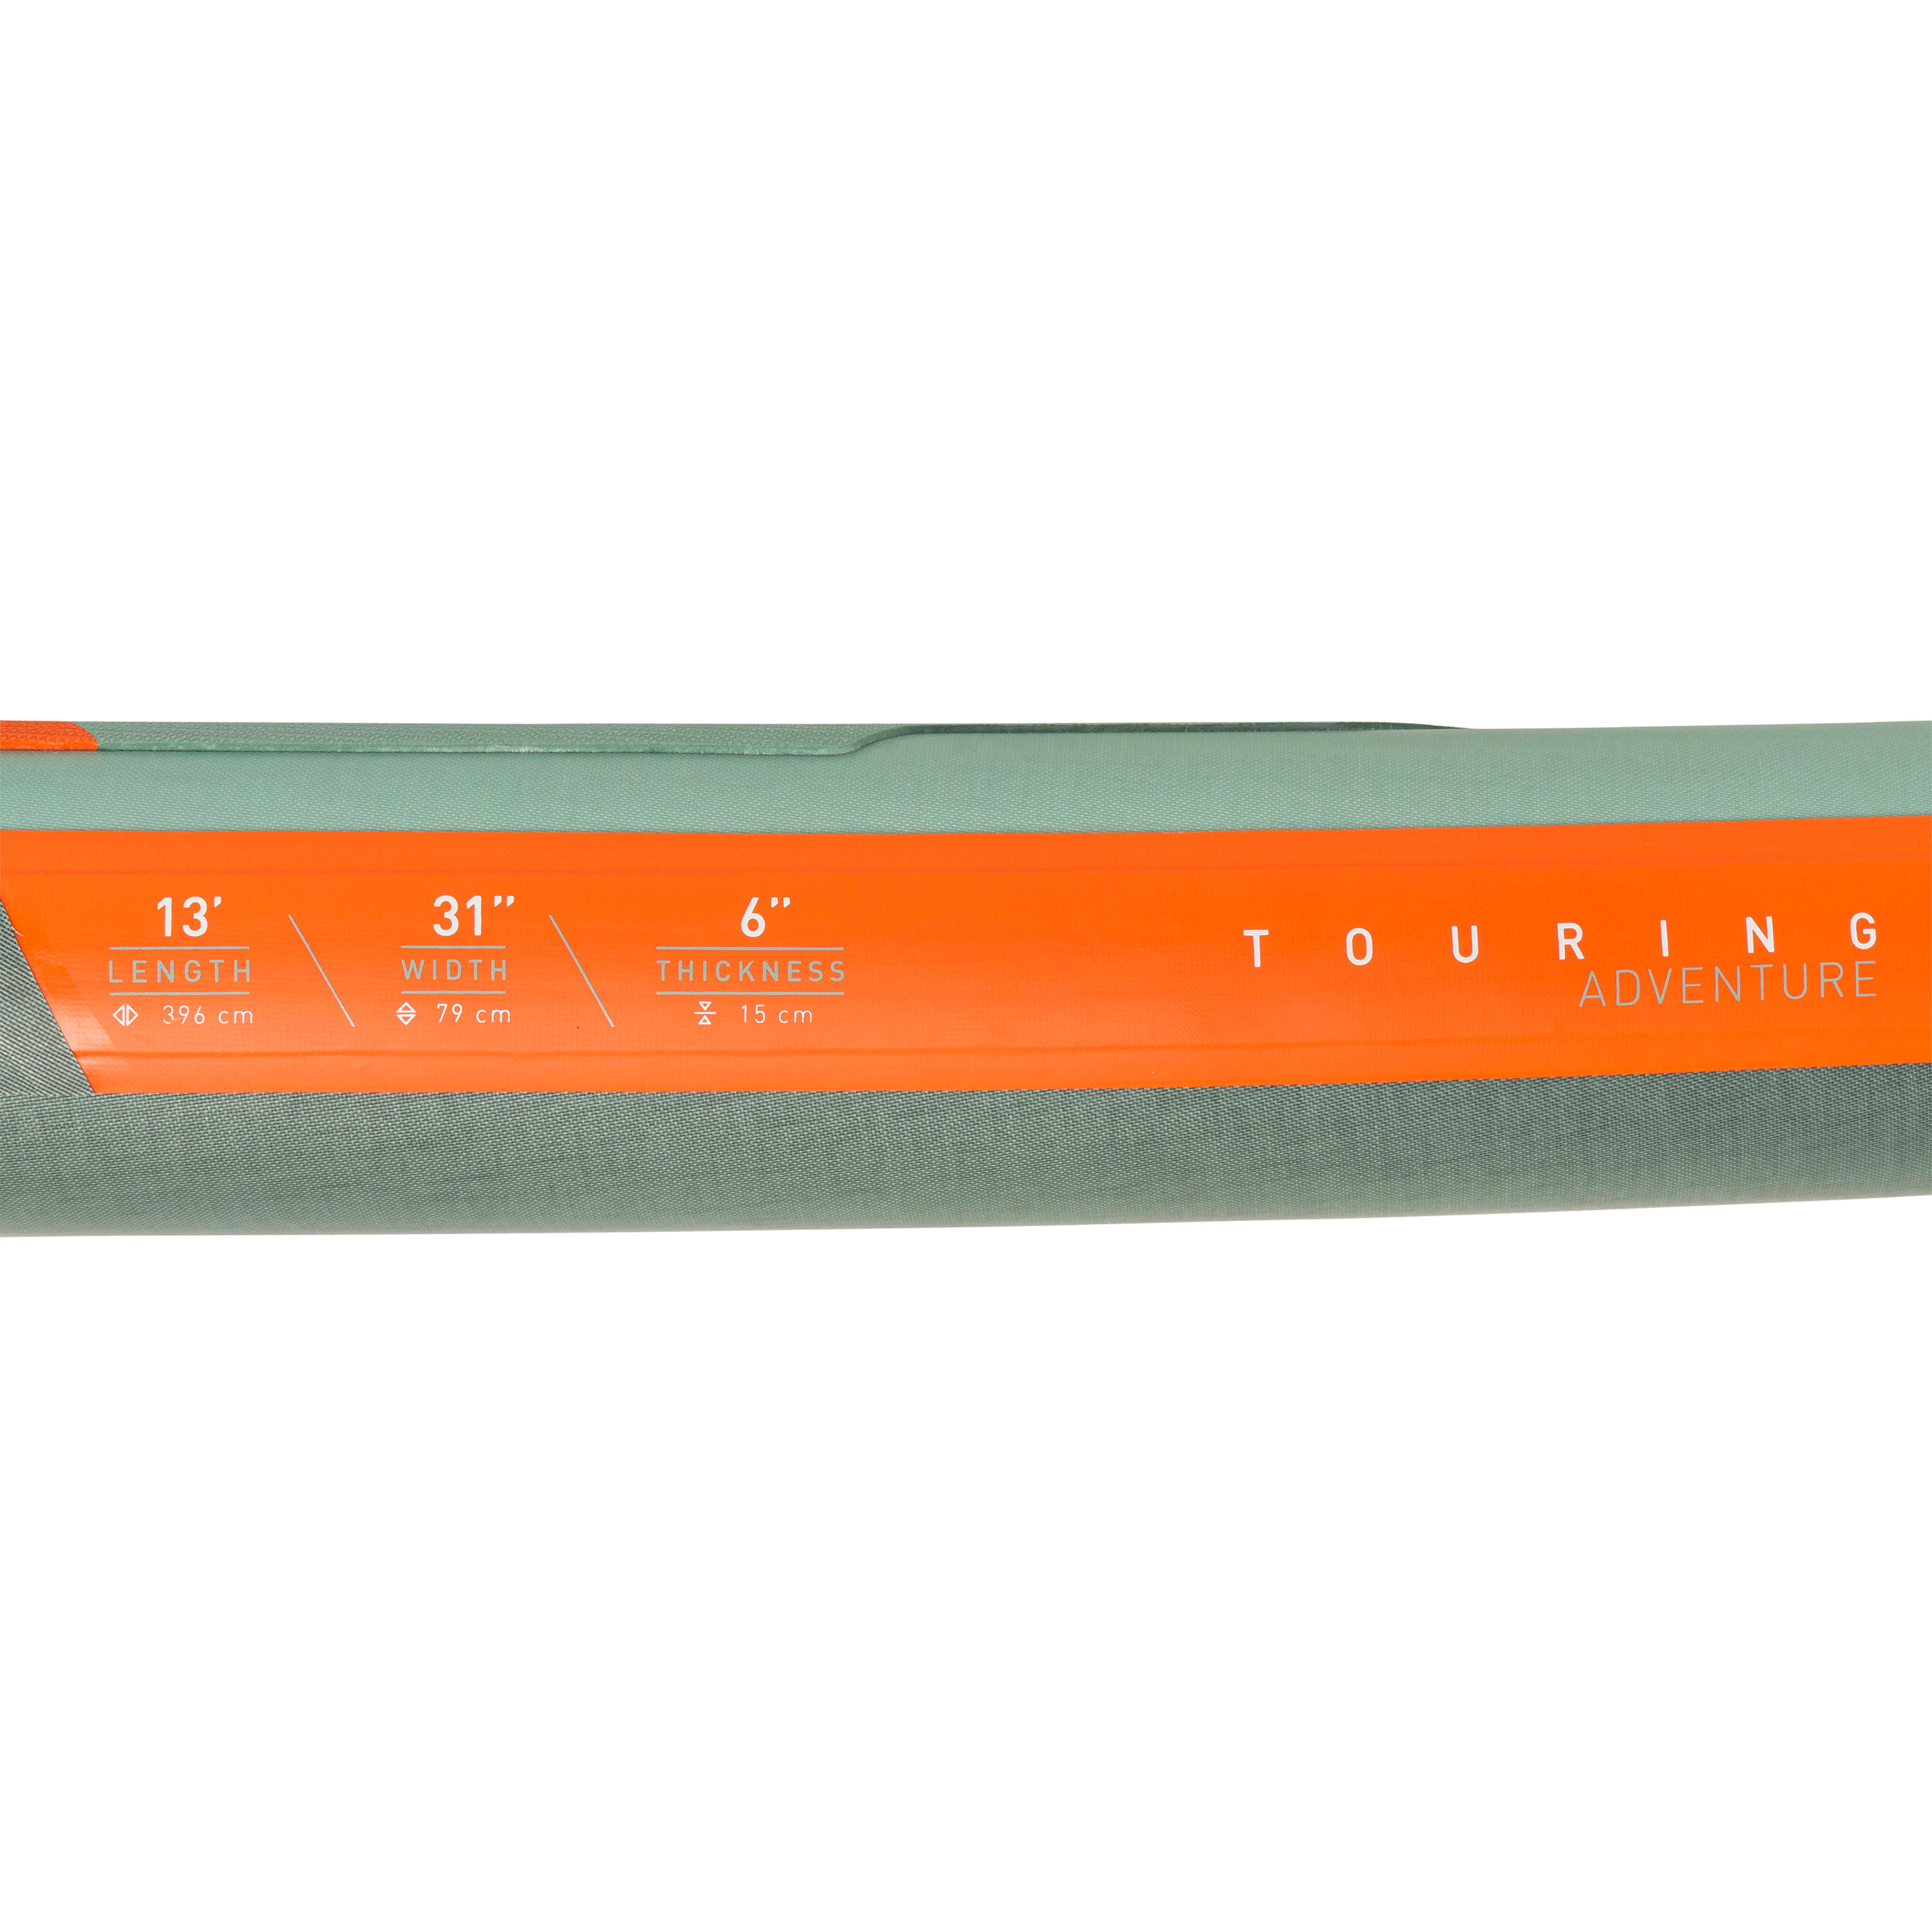 13" Inflatable Paddle Board - 500 Green - ITIWIT